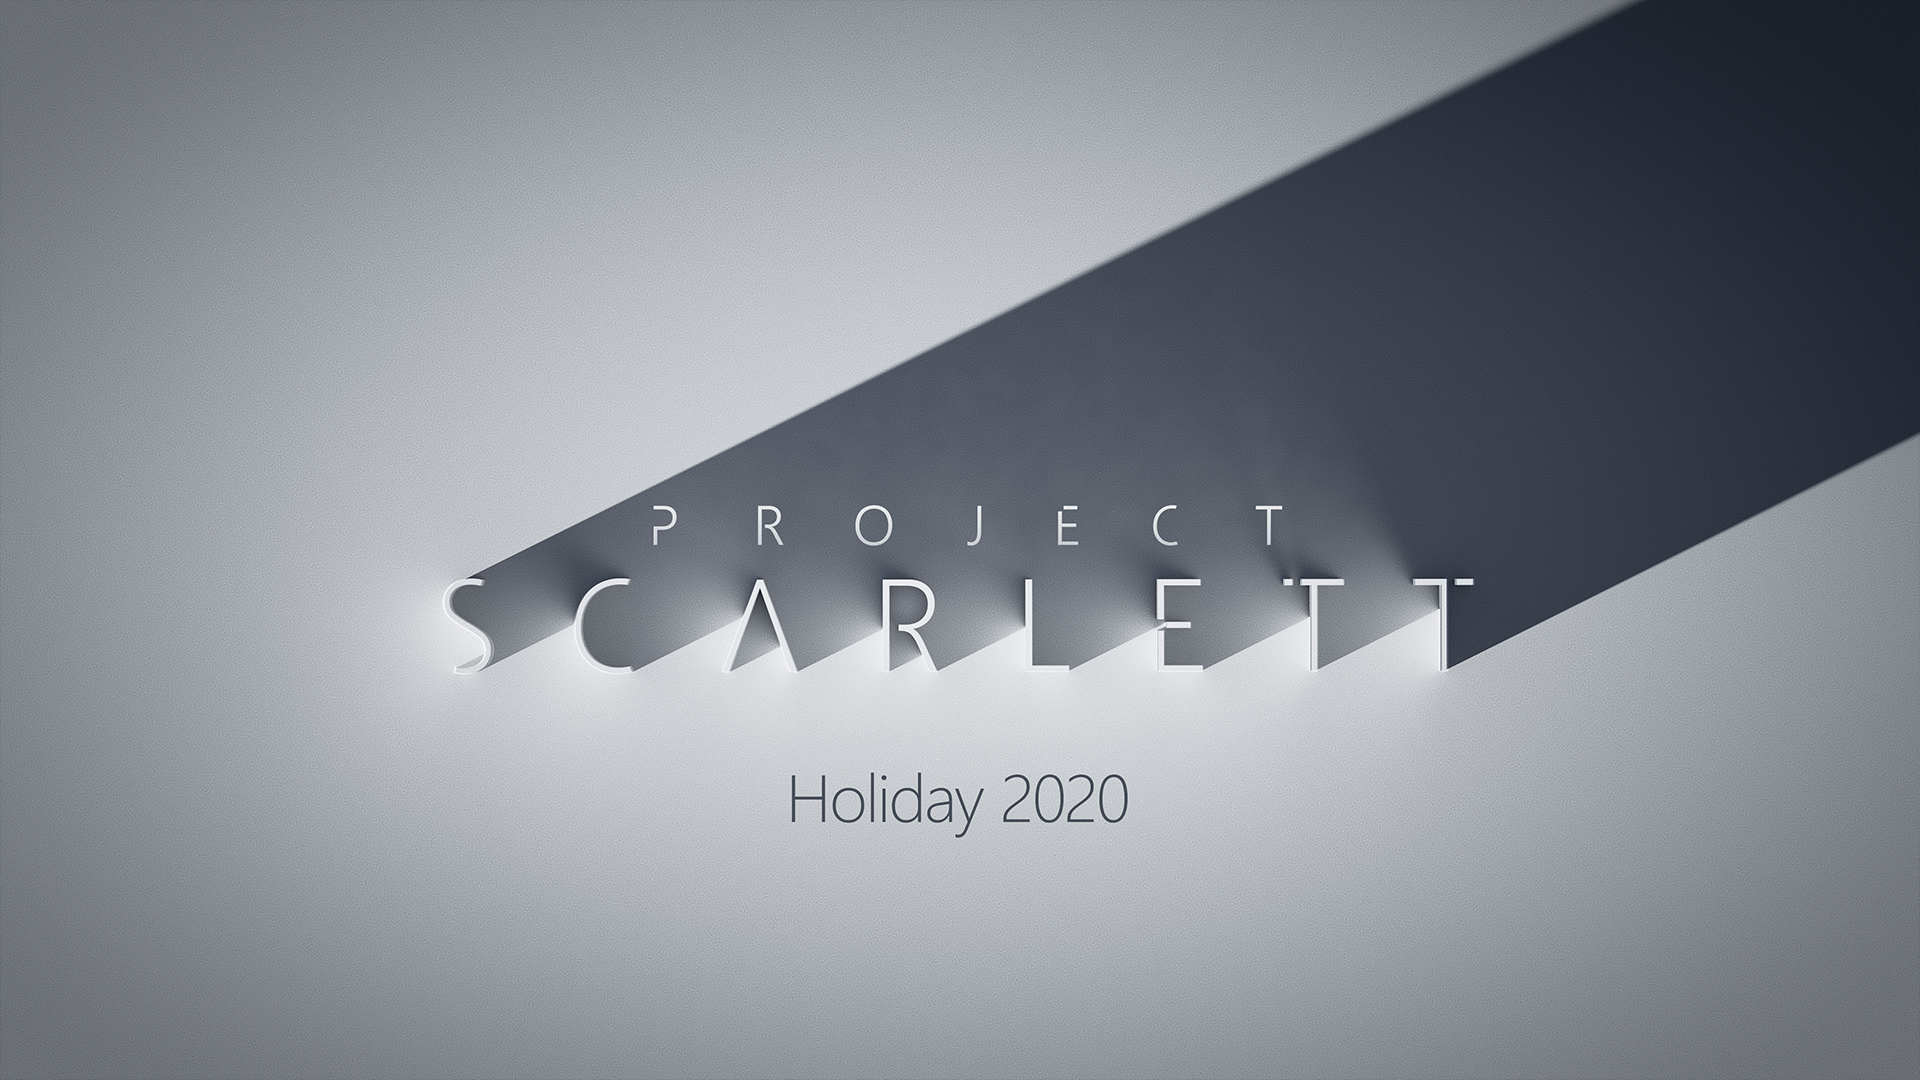 Project Scarlett officially unveiled by Xbox